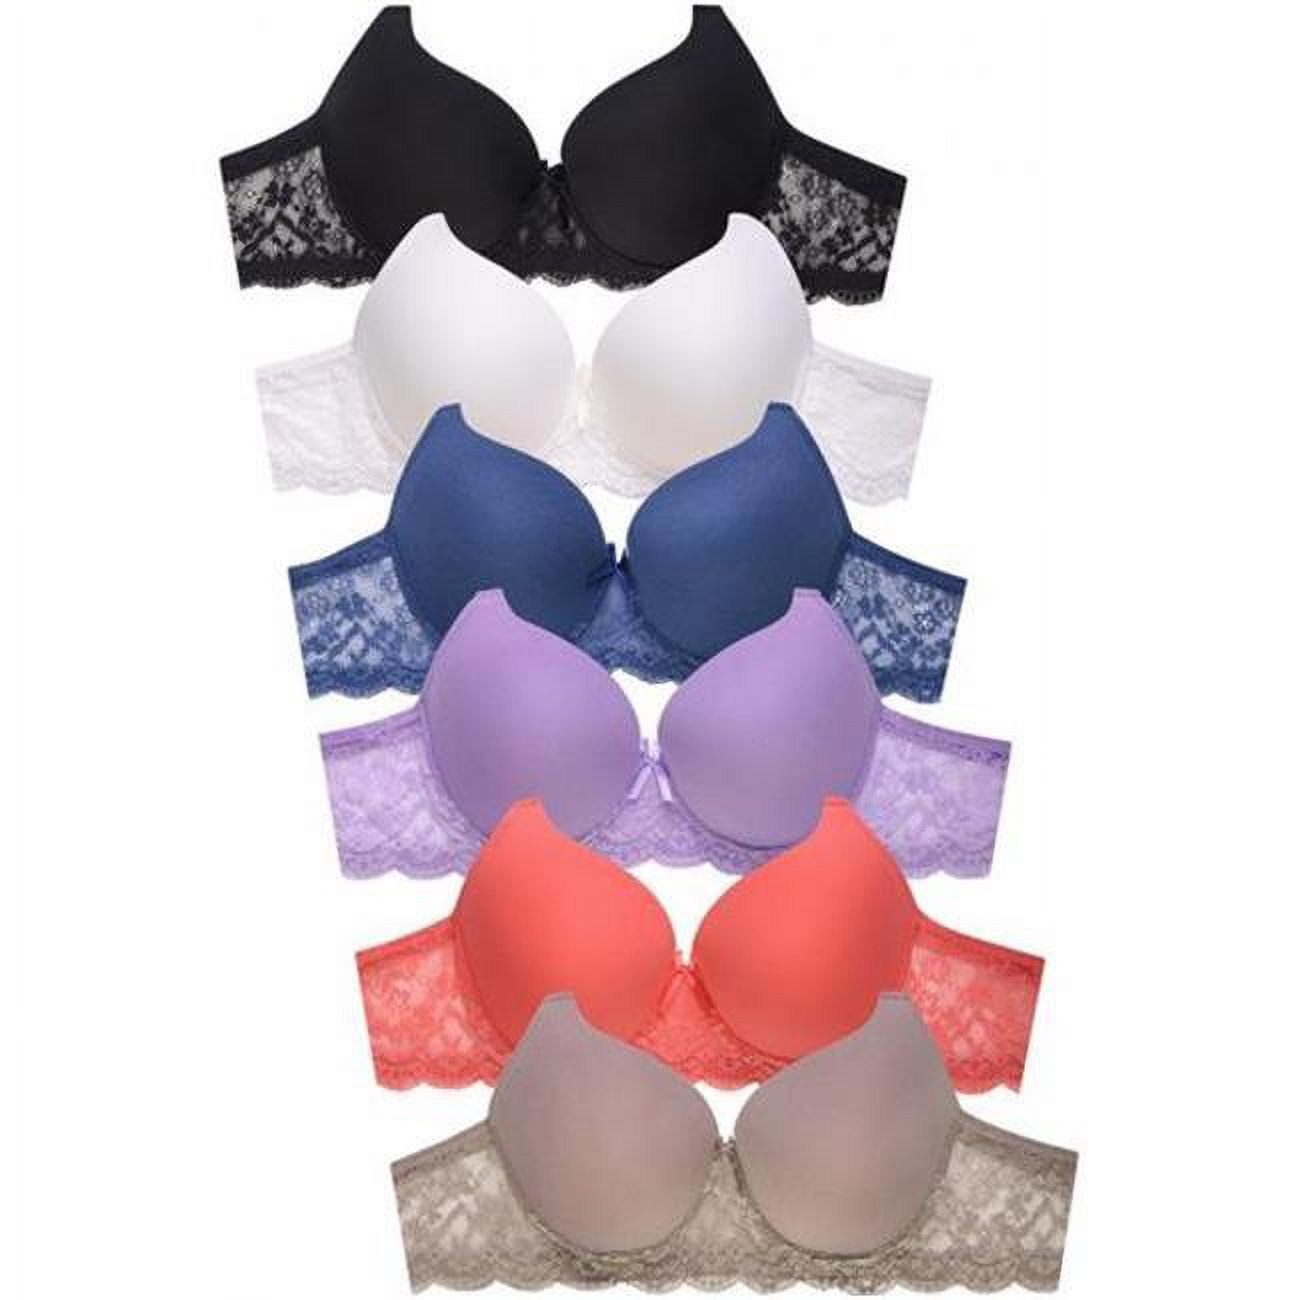 Sofra BR4237PLD - 36D Womens Full Coverage Bra - D Cup Style Intimate Sets,  Size 36D - Pack of 6